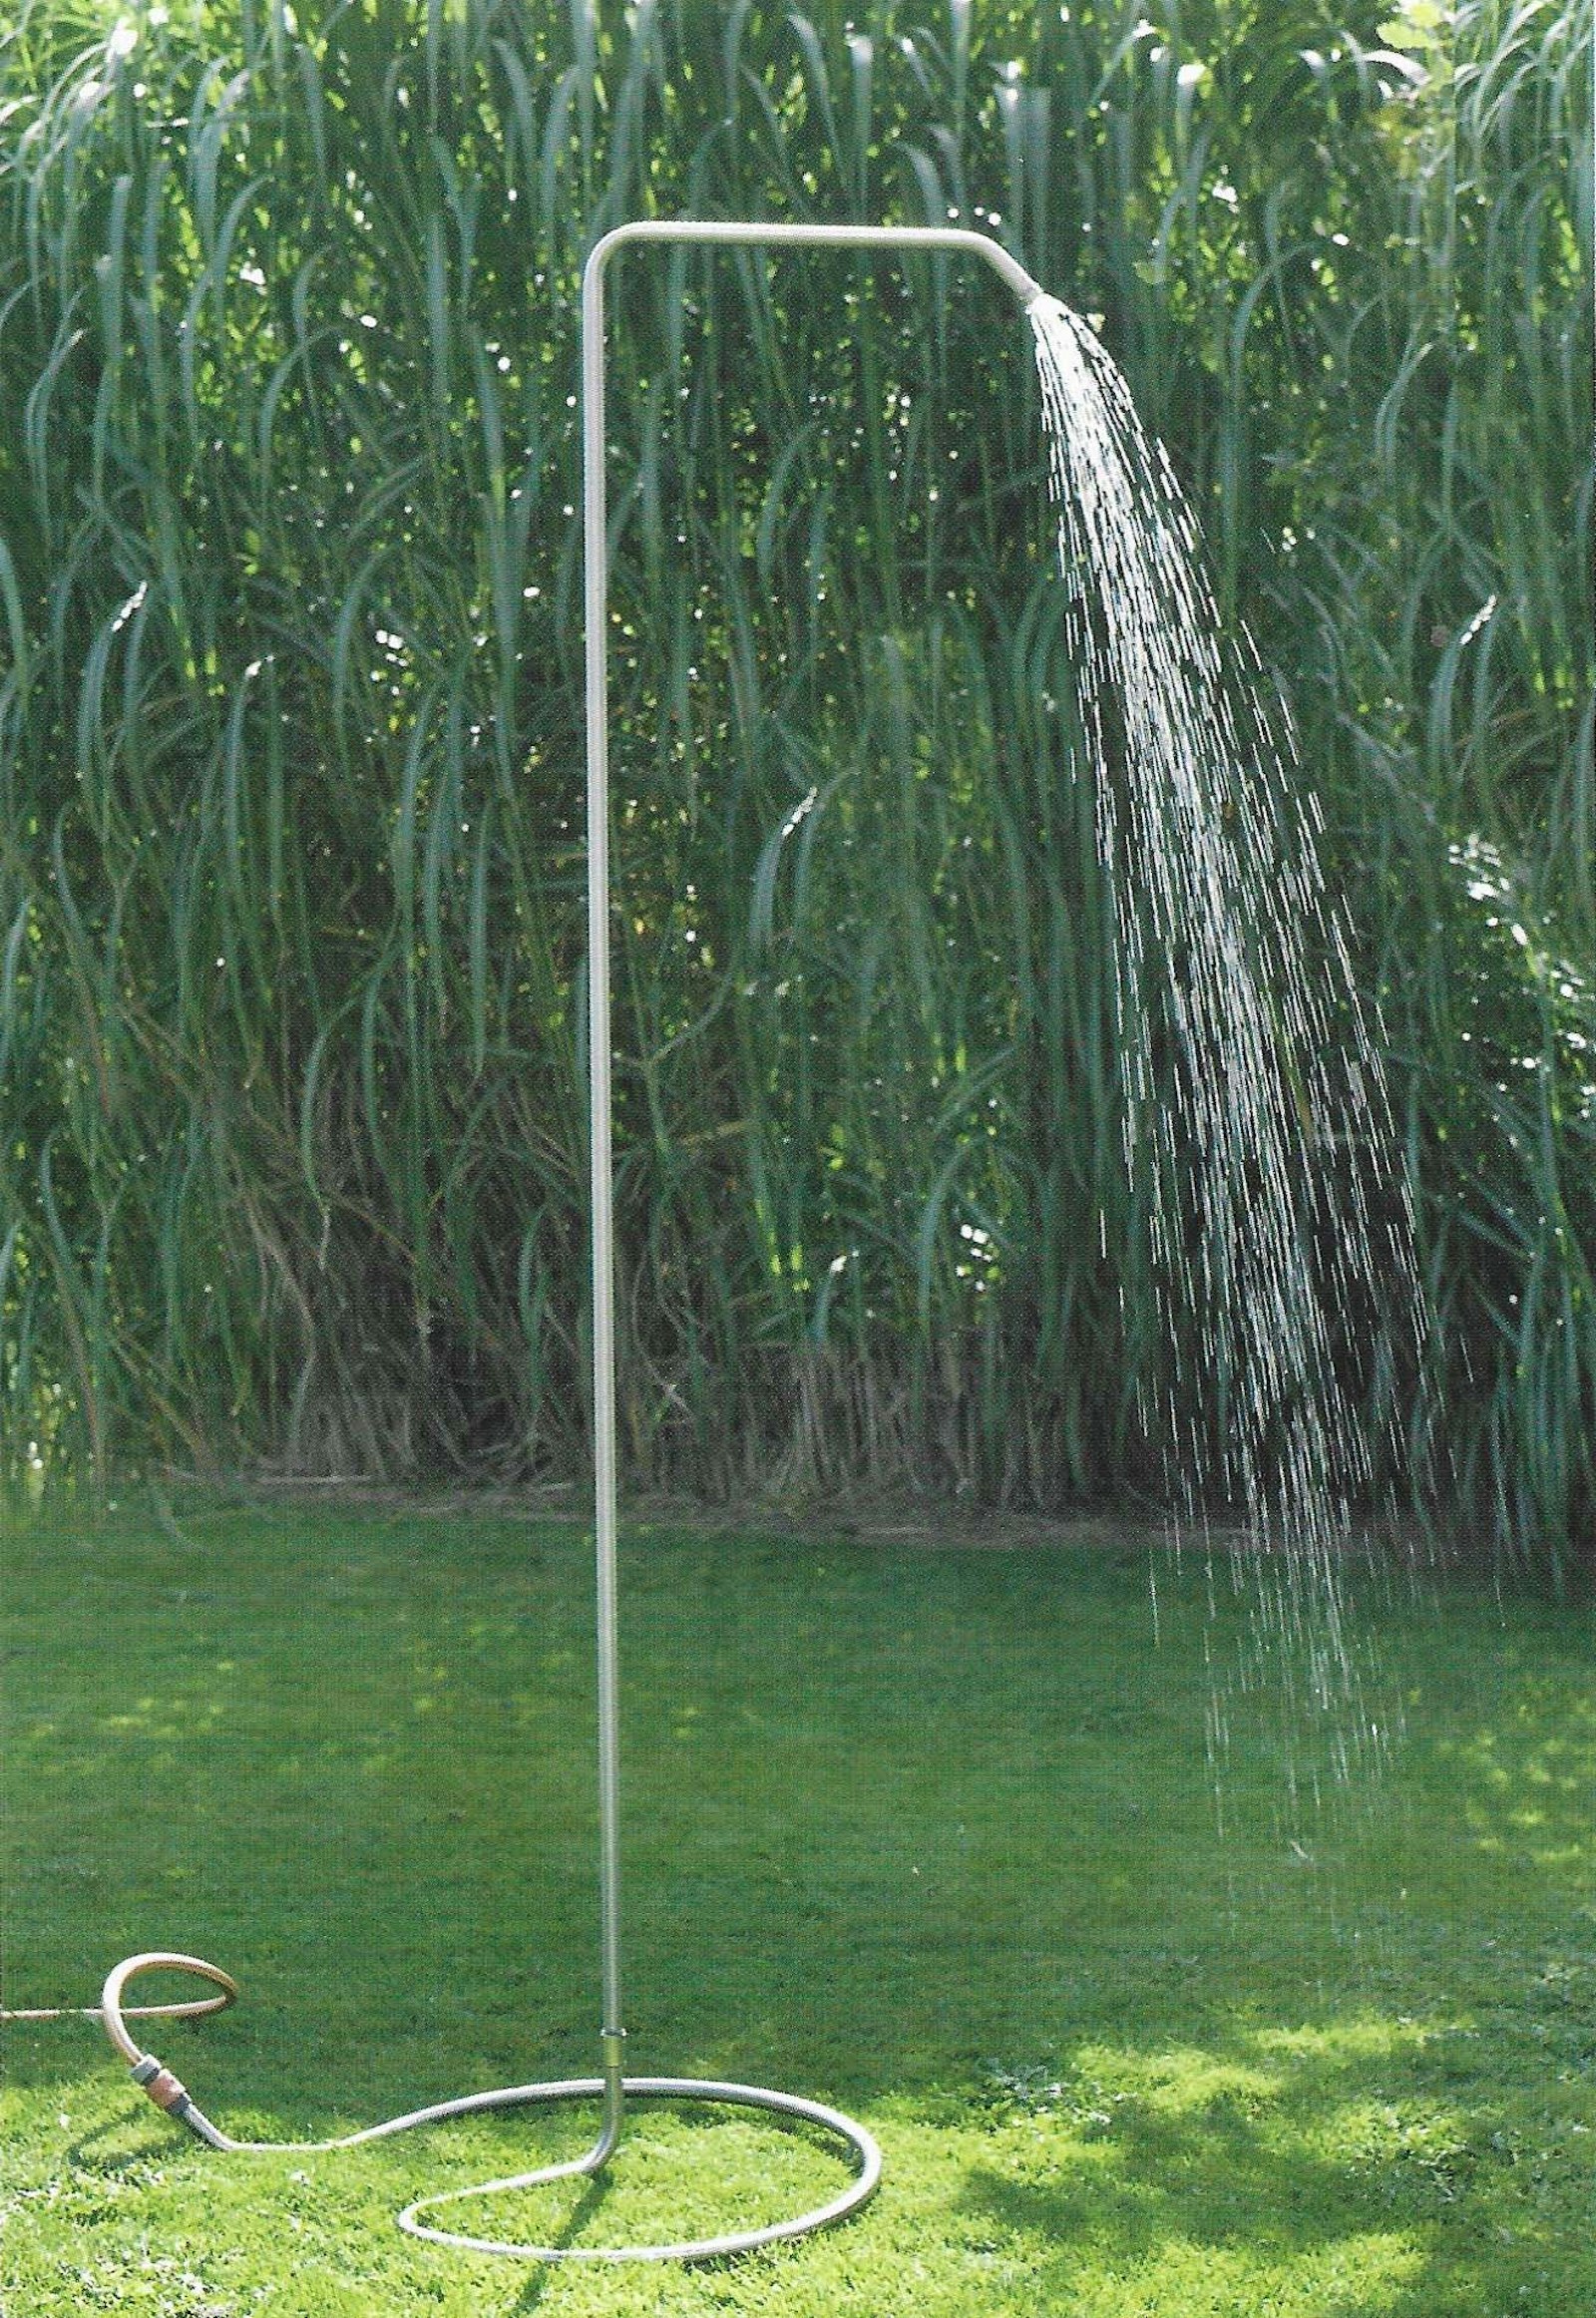 'Serpentine', 'plug and spray' garden shower, Tom De Vrieze (TOVdesign) for Extremis, 210 x 60,1 x 98,2 cm, stainless steel, traditional roll, fold and weld techniques